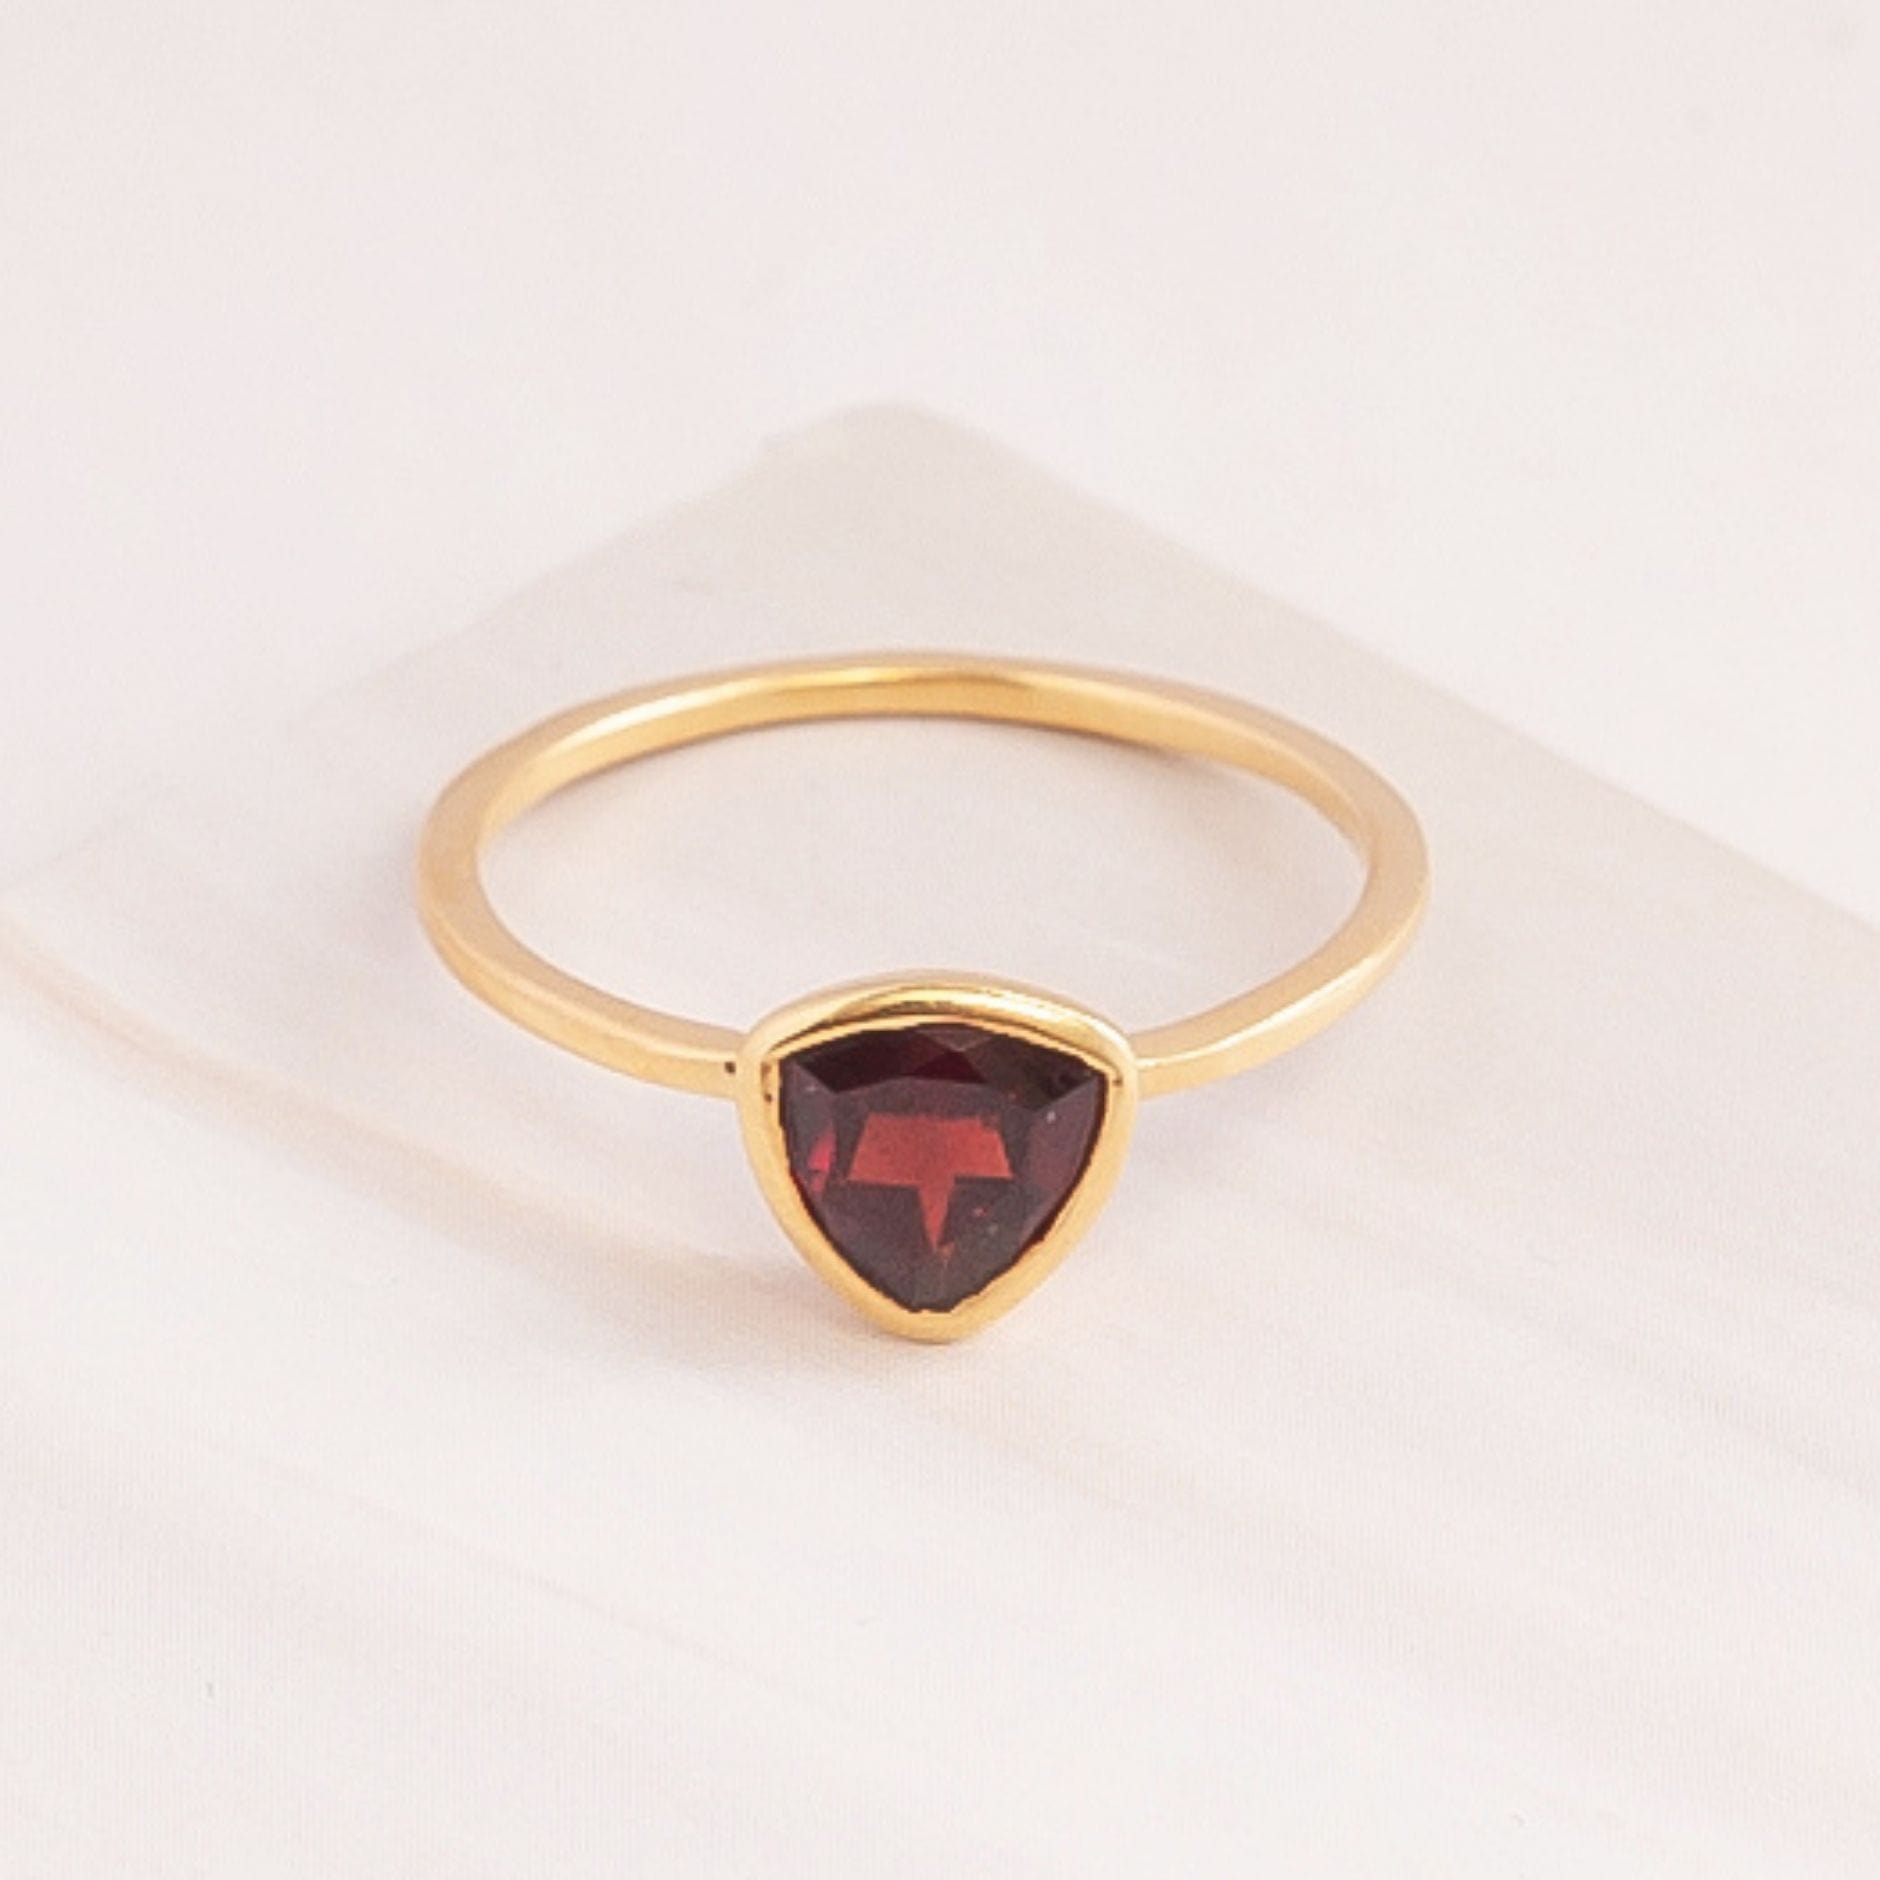 Emblem Jewelry Rings Red Garnet / Triangle Signature Candy Gemstone Stack Rings (Ring Size 7)